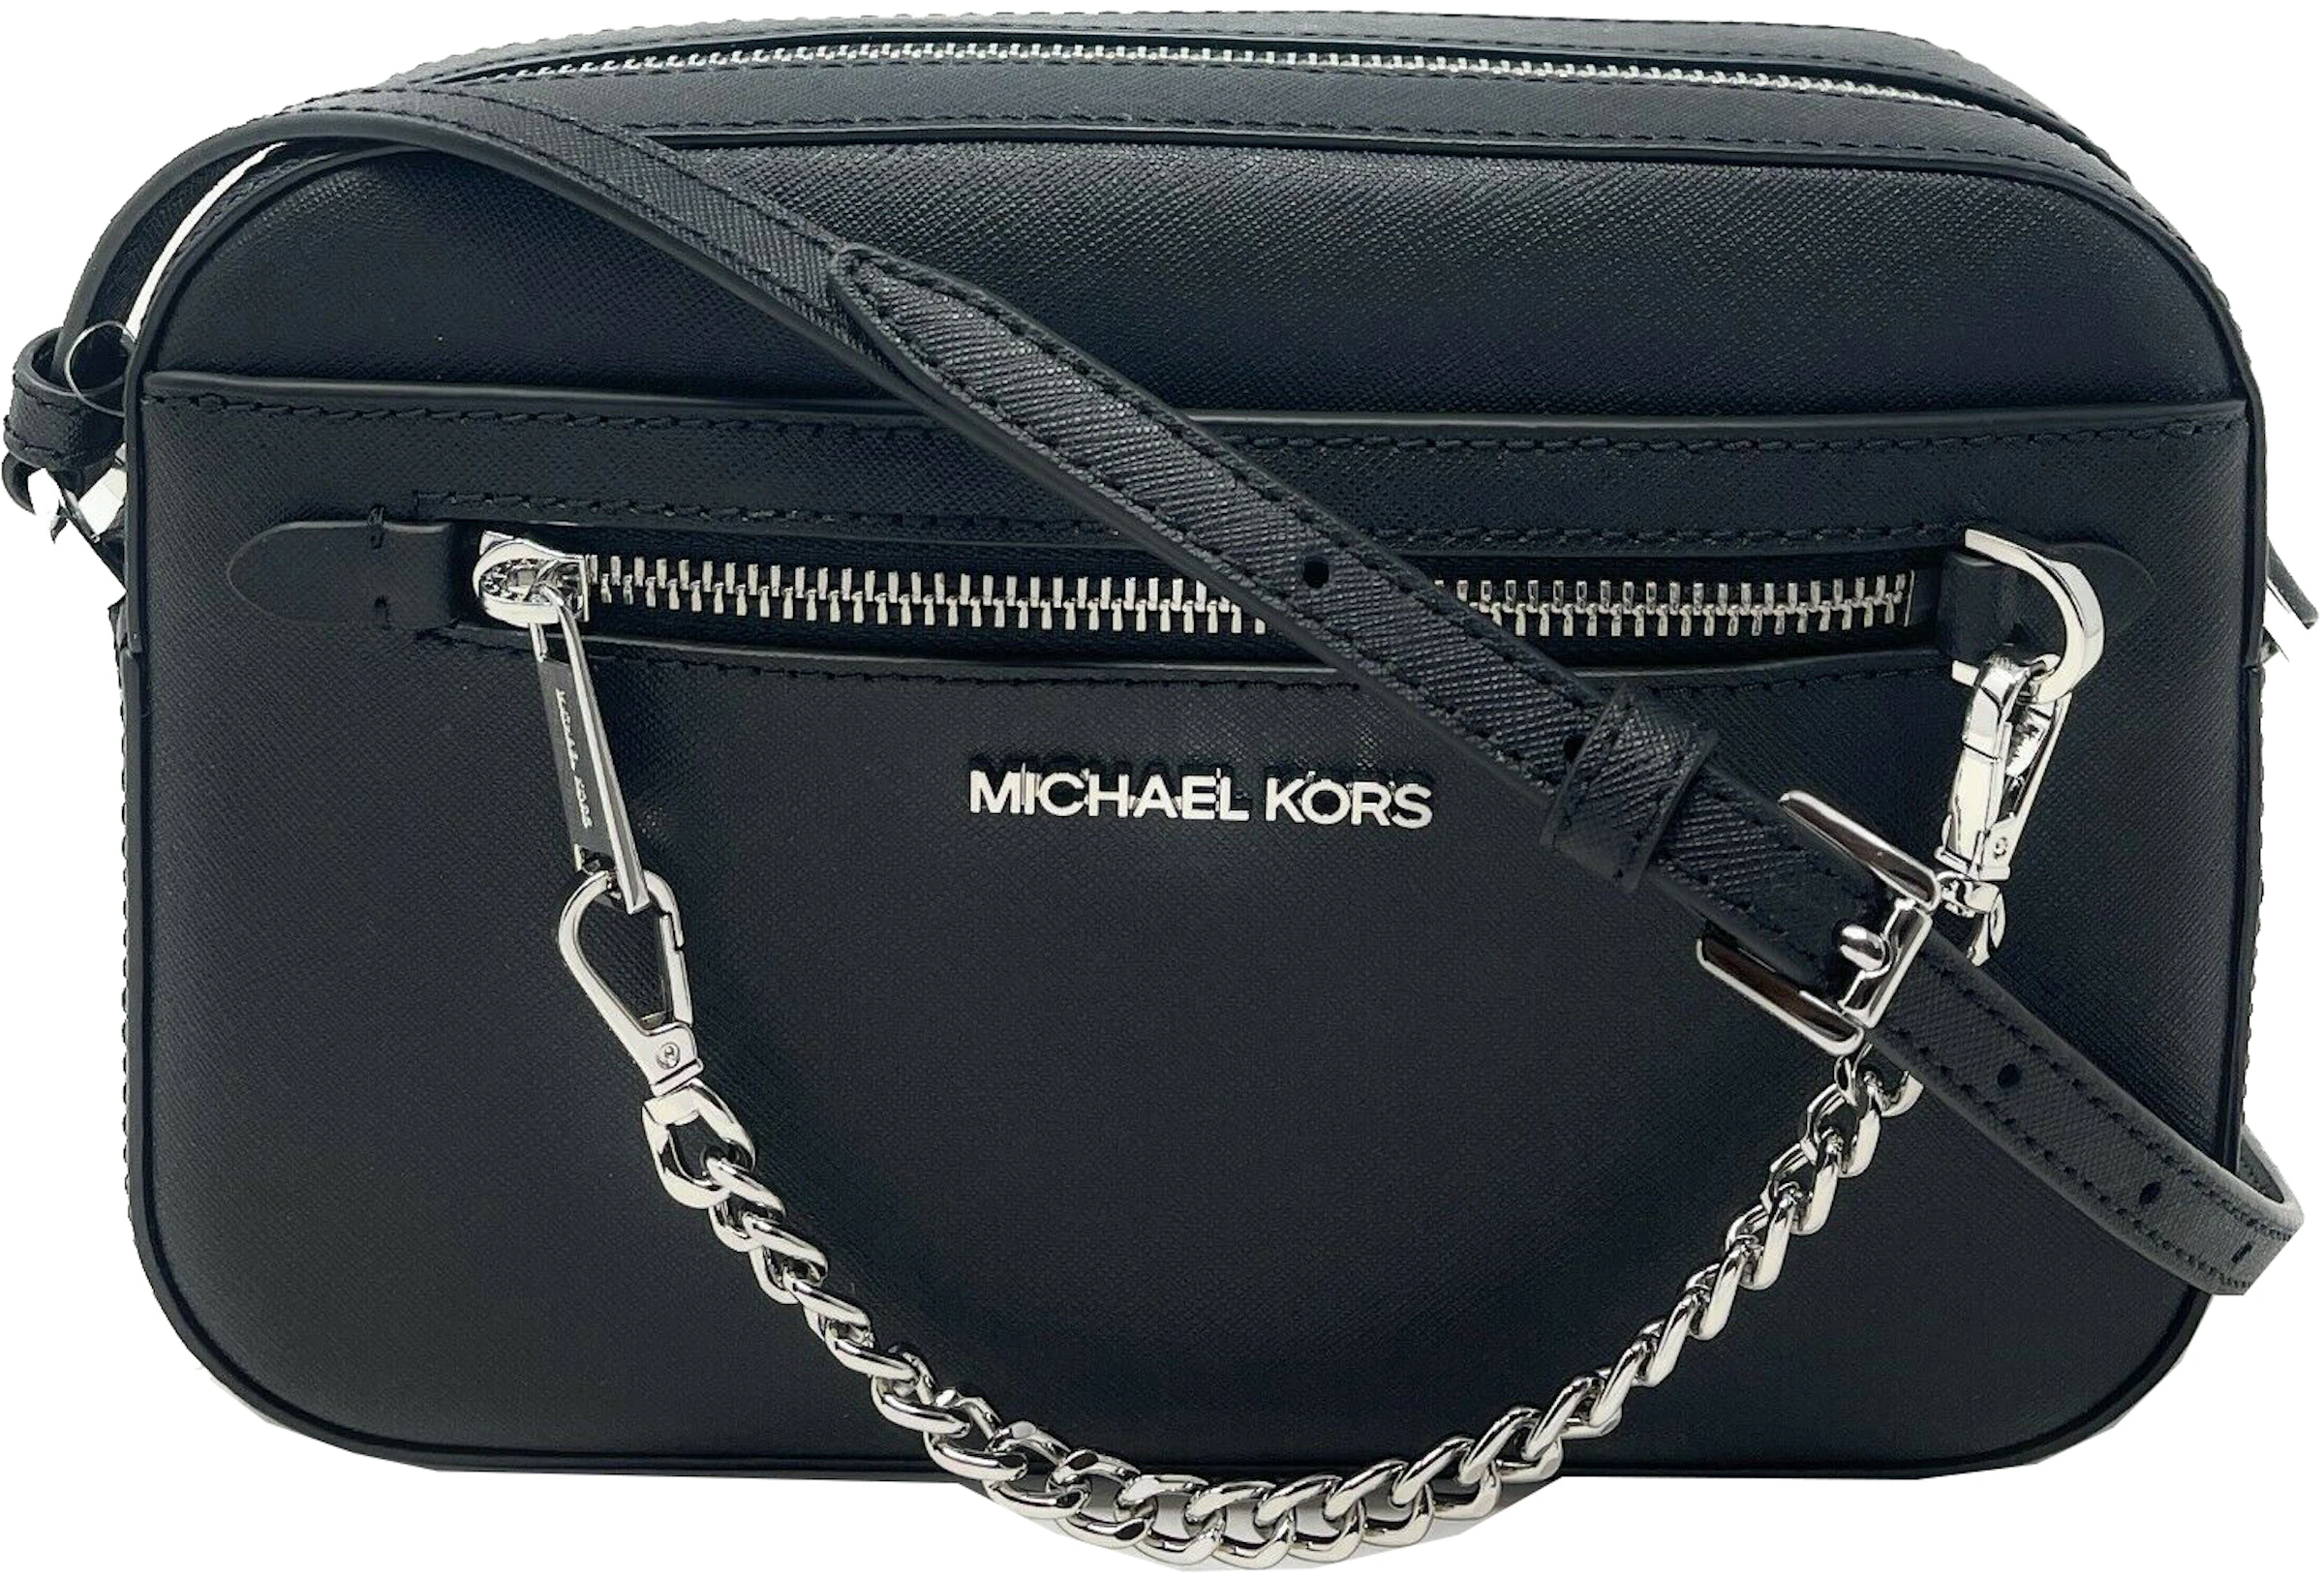 Michael Kors Jet Set Zip Chain Crossbody Bag Large Black/Silver in Saffiano  Leather with Silver-tone - US